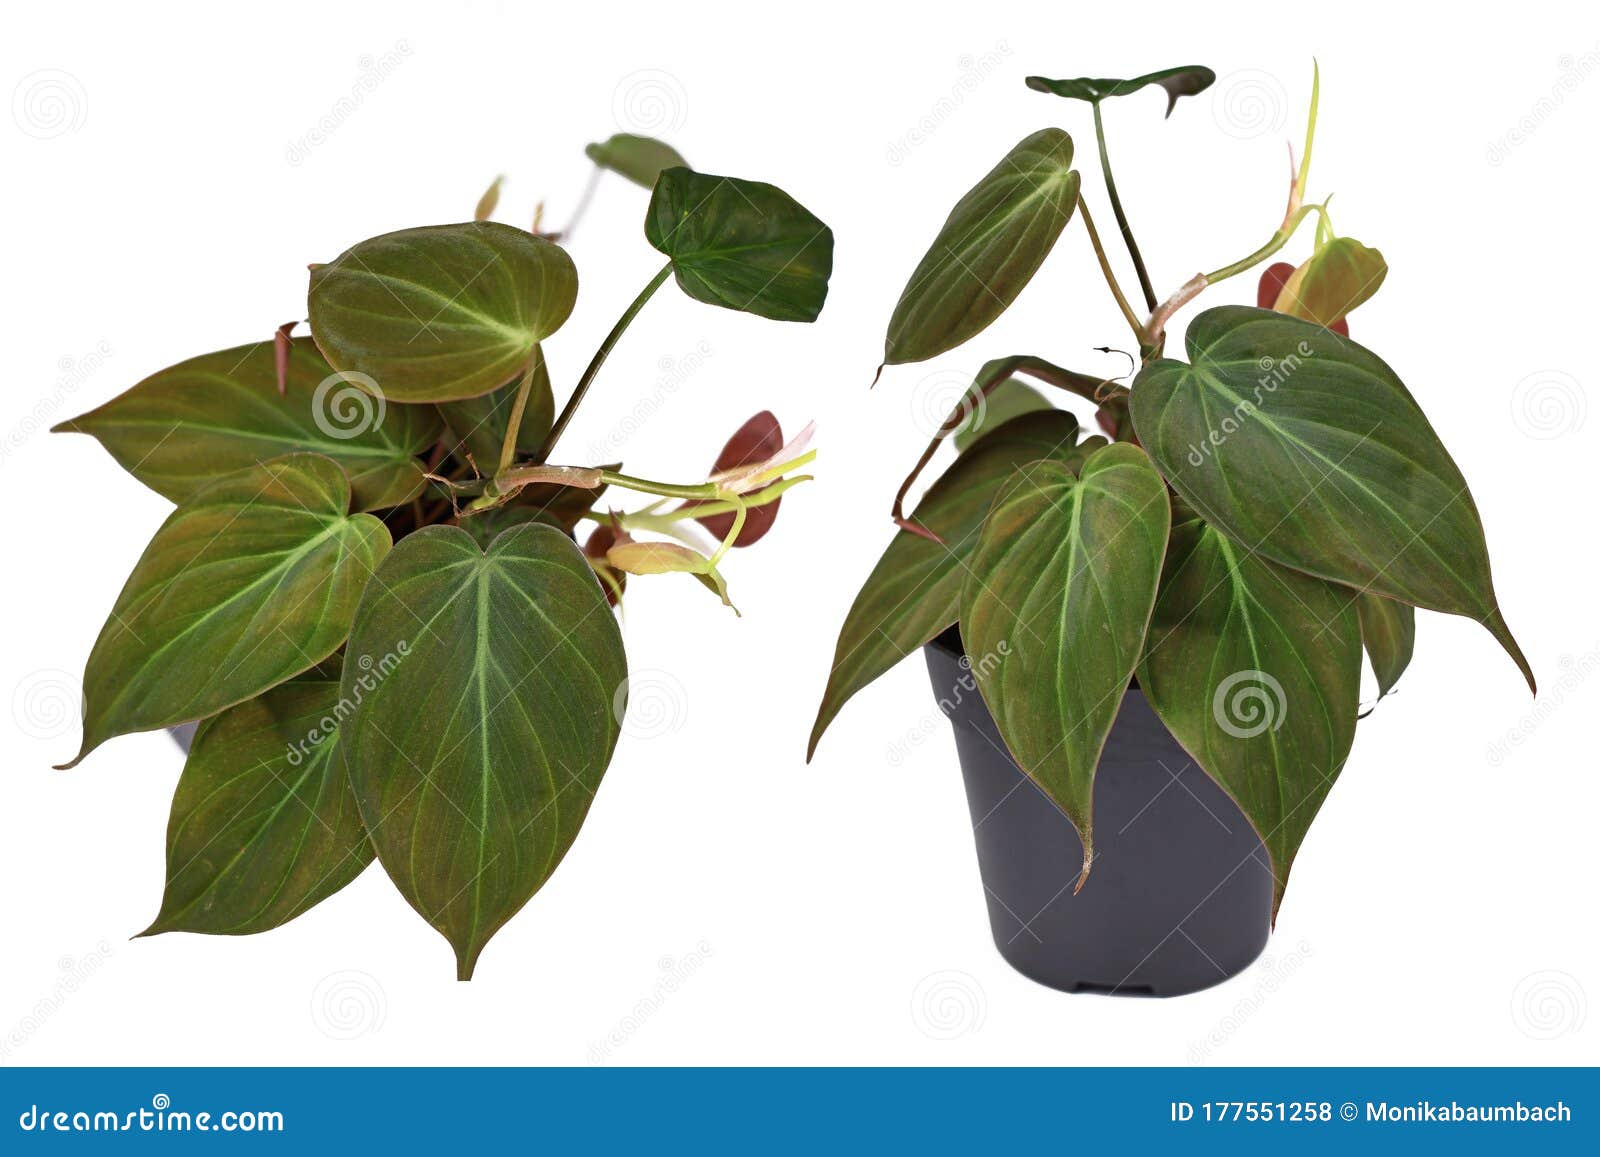 different views of `philodendron hederaceum micans` house plant with heart d leaves with velvet texture on white background